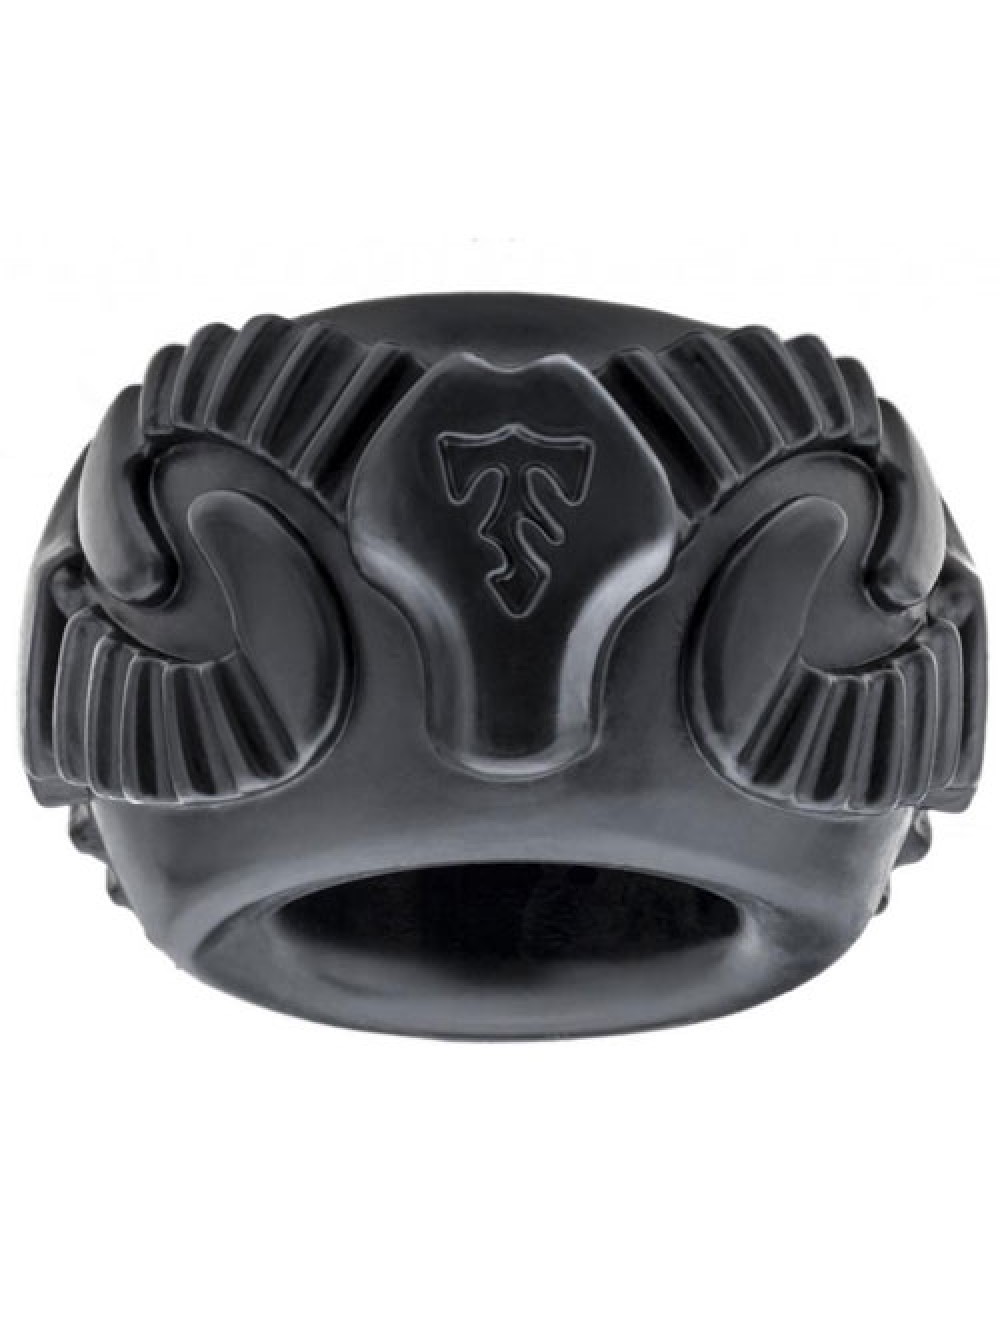 Perfect Fit Tribal Son Ram Ring 2 Pack Black 852184004448